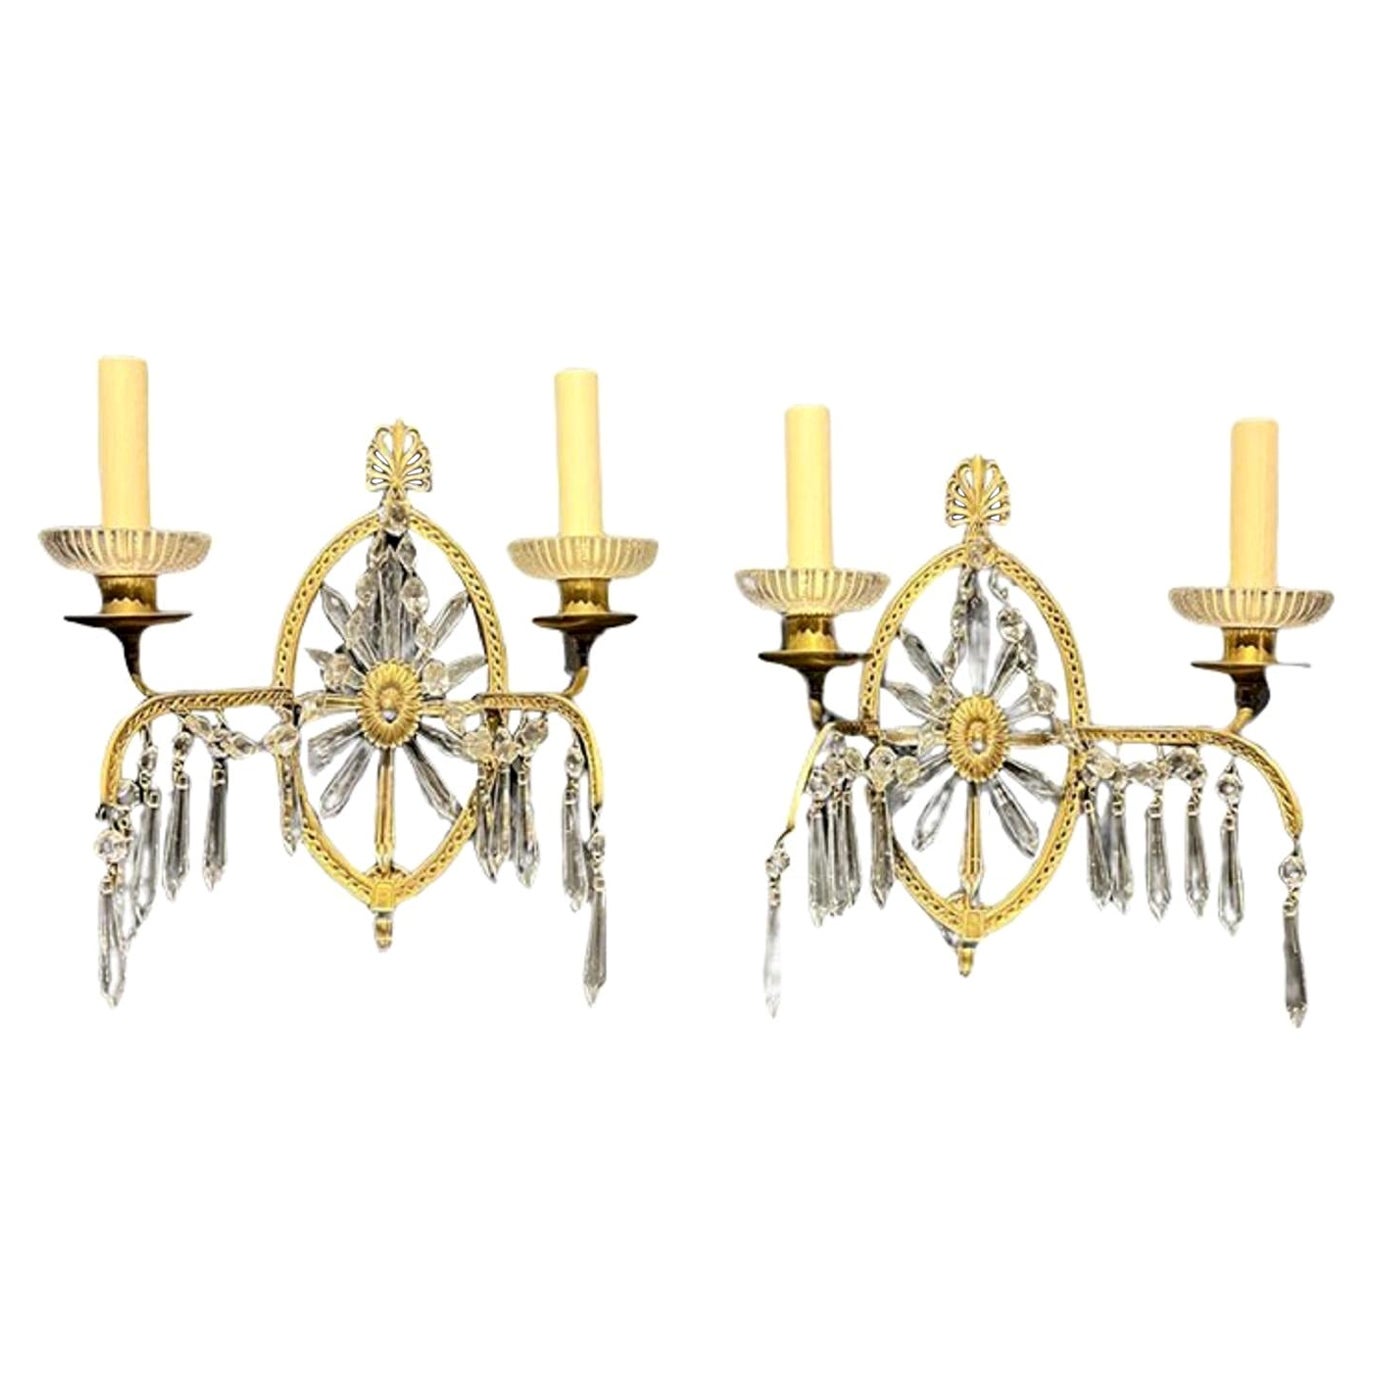 1920s Gilt Bronze and Crystals Caldwell Sconces For Sale